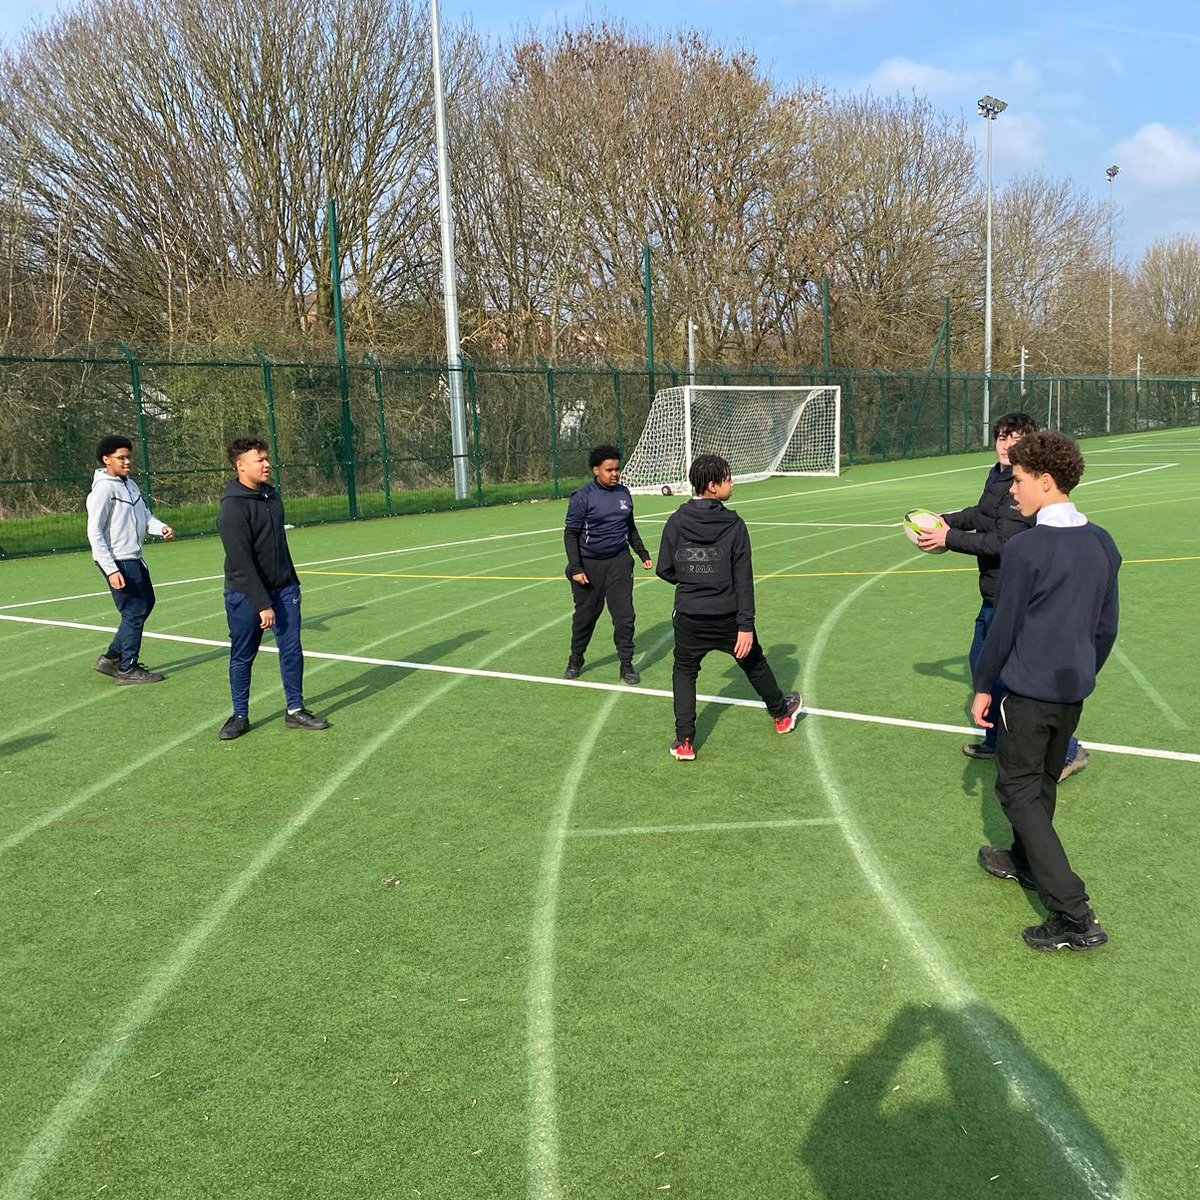 A great start to our Bright Sparks programme at @FHSBristol with students improving their teamwork and communication skills in the classroom and with a variety of different sporting activities! 🐻🏉